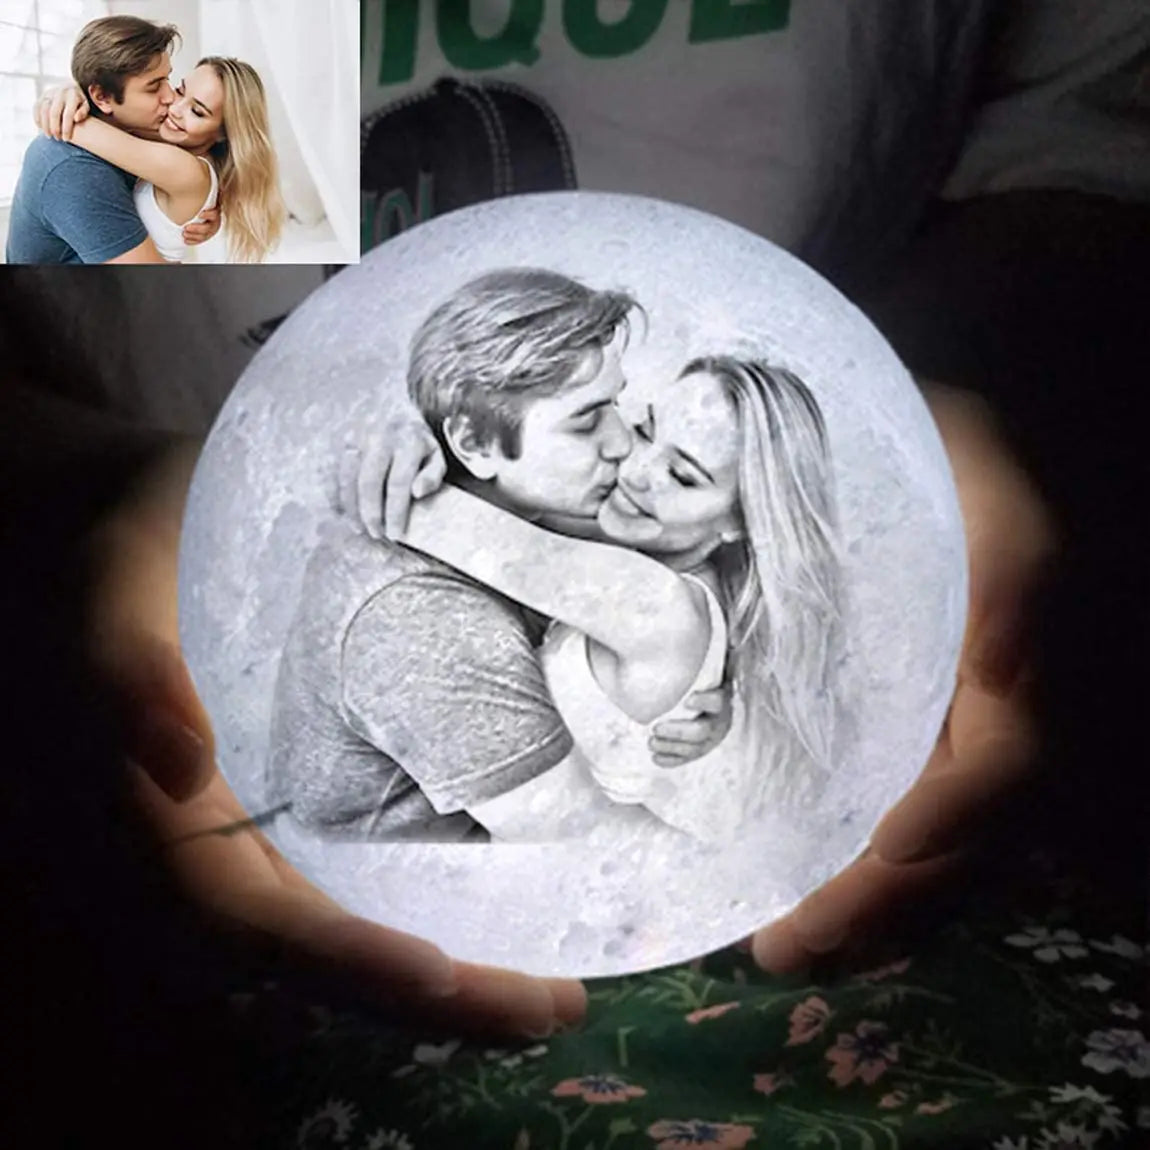 ZK20 Customized Photo Moon Lamp Personalized Kids Wife's Gifts Night Light USB Charging Tap Control  2/3 Colors Lunar Light  ourlum.com   